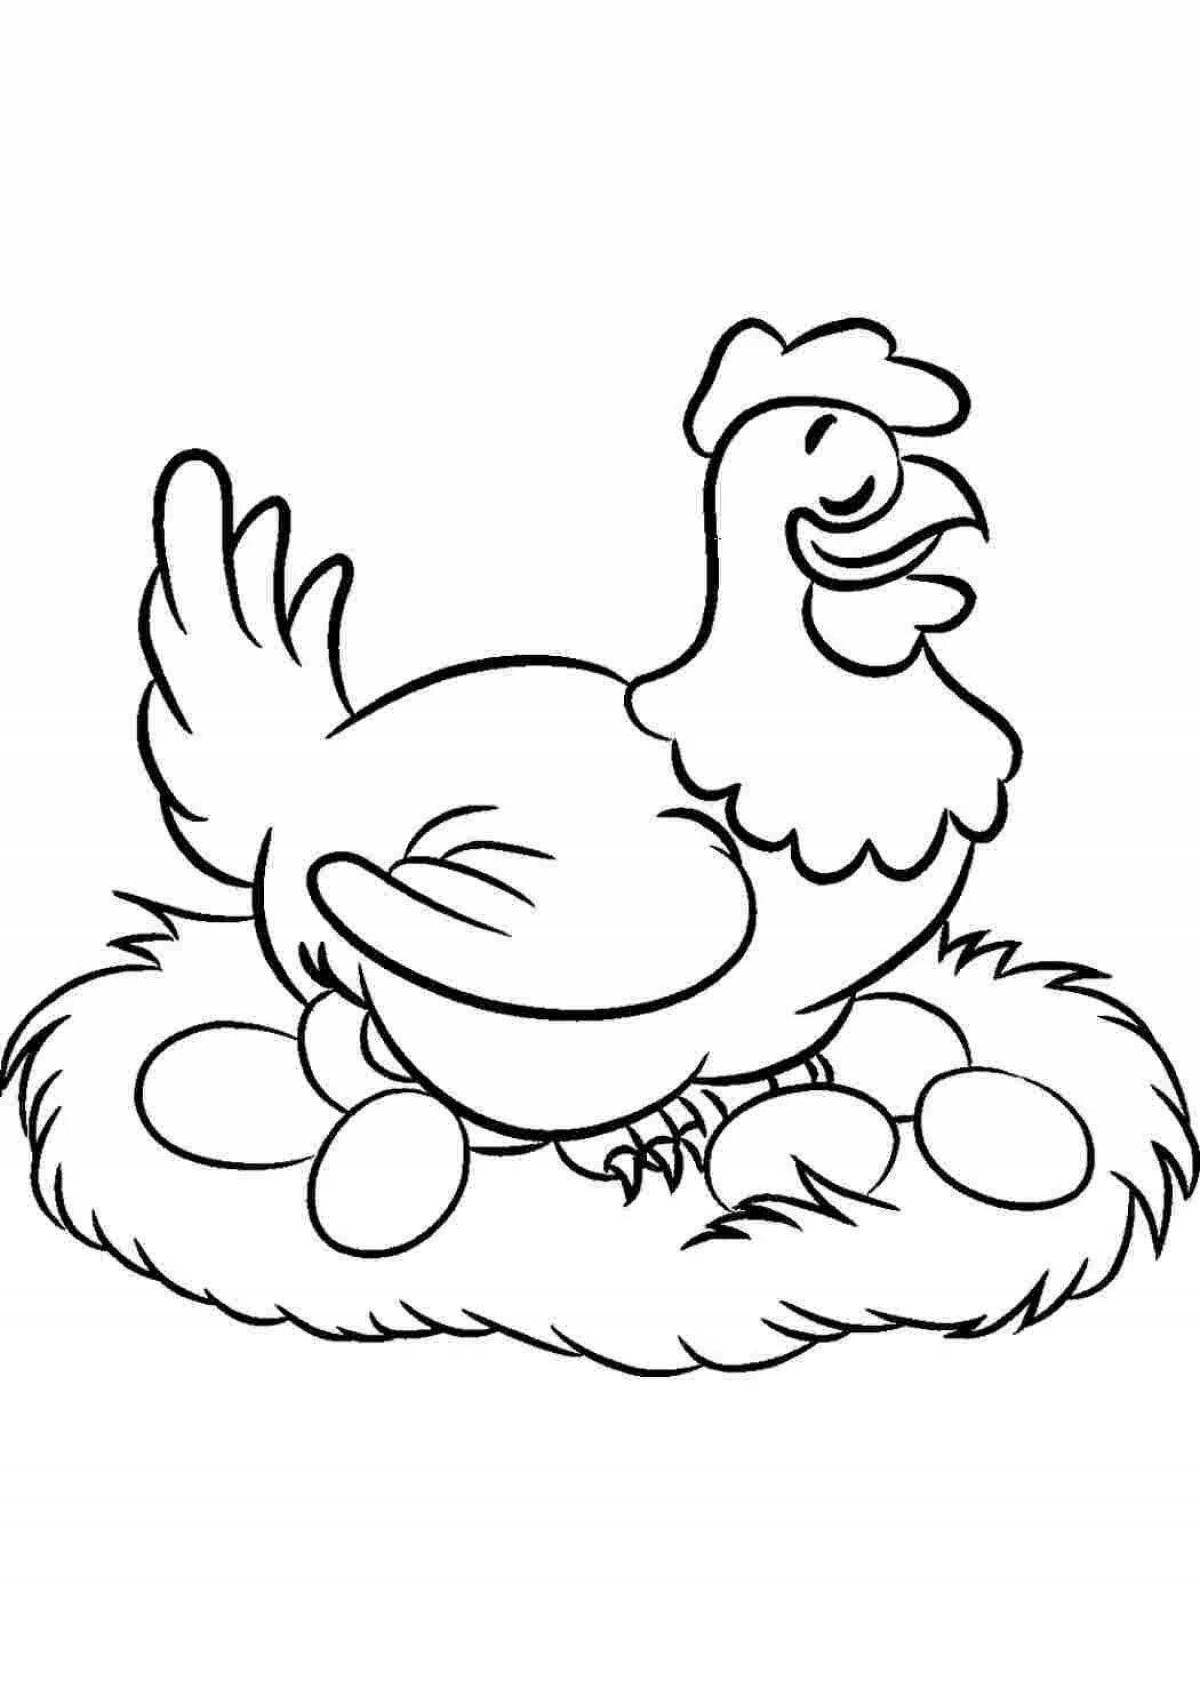 Playful chicken drawing for kids